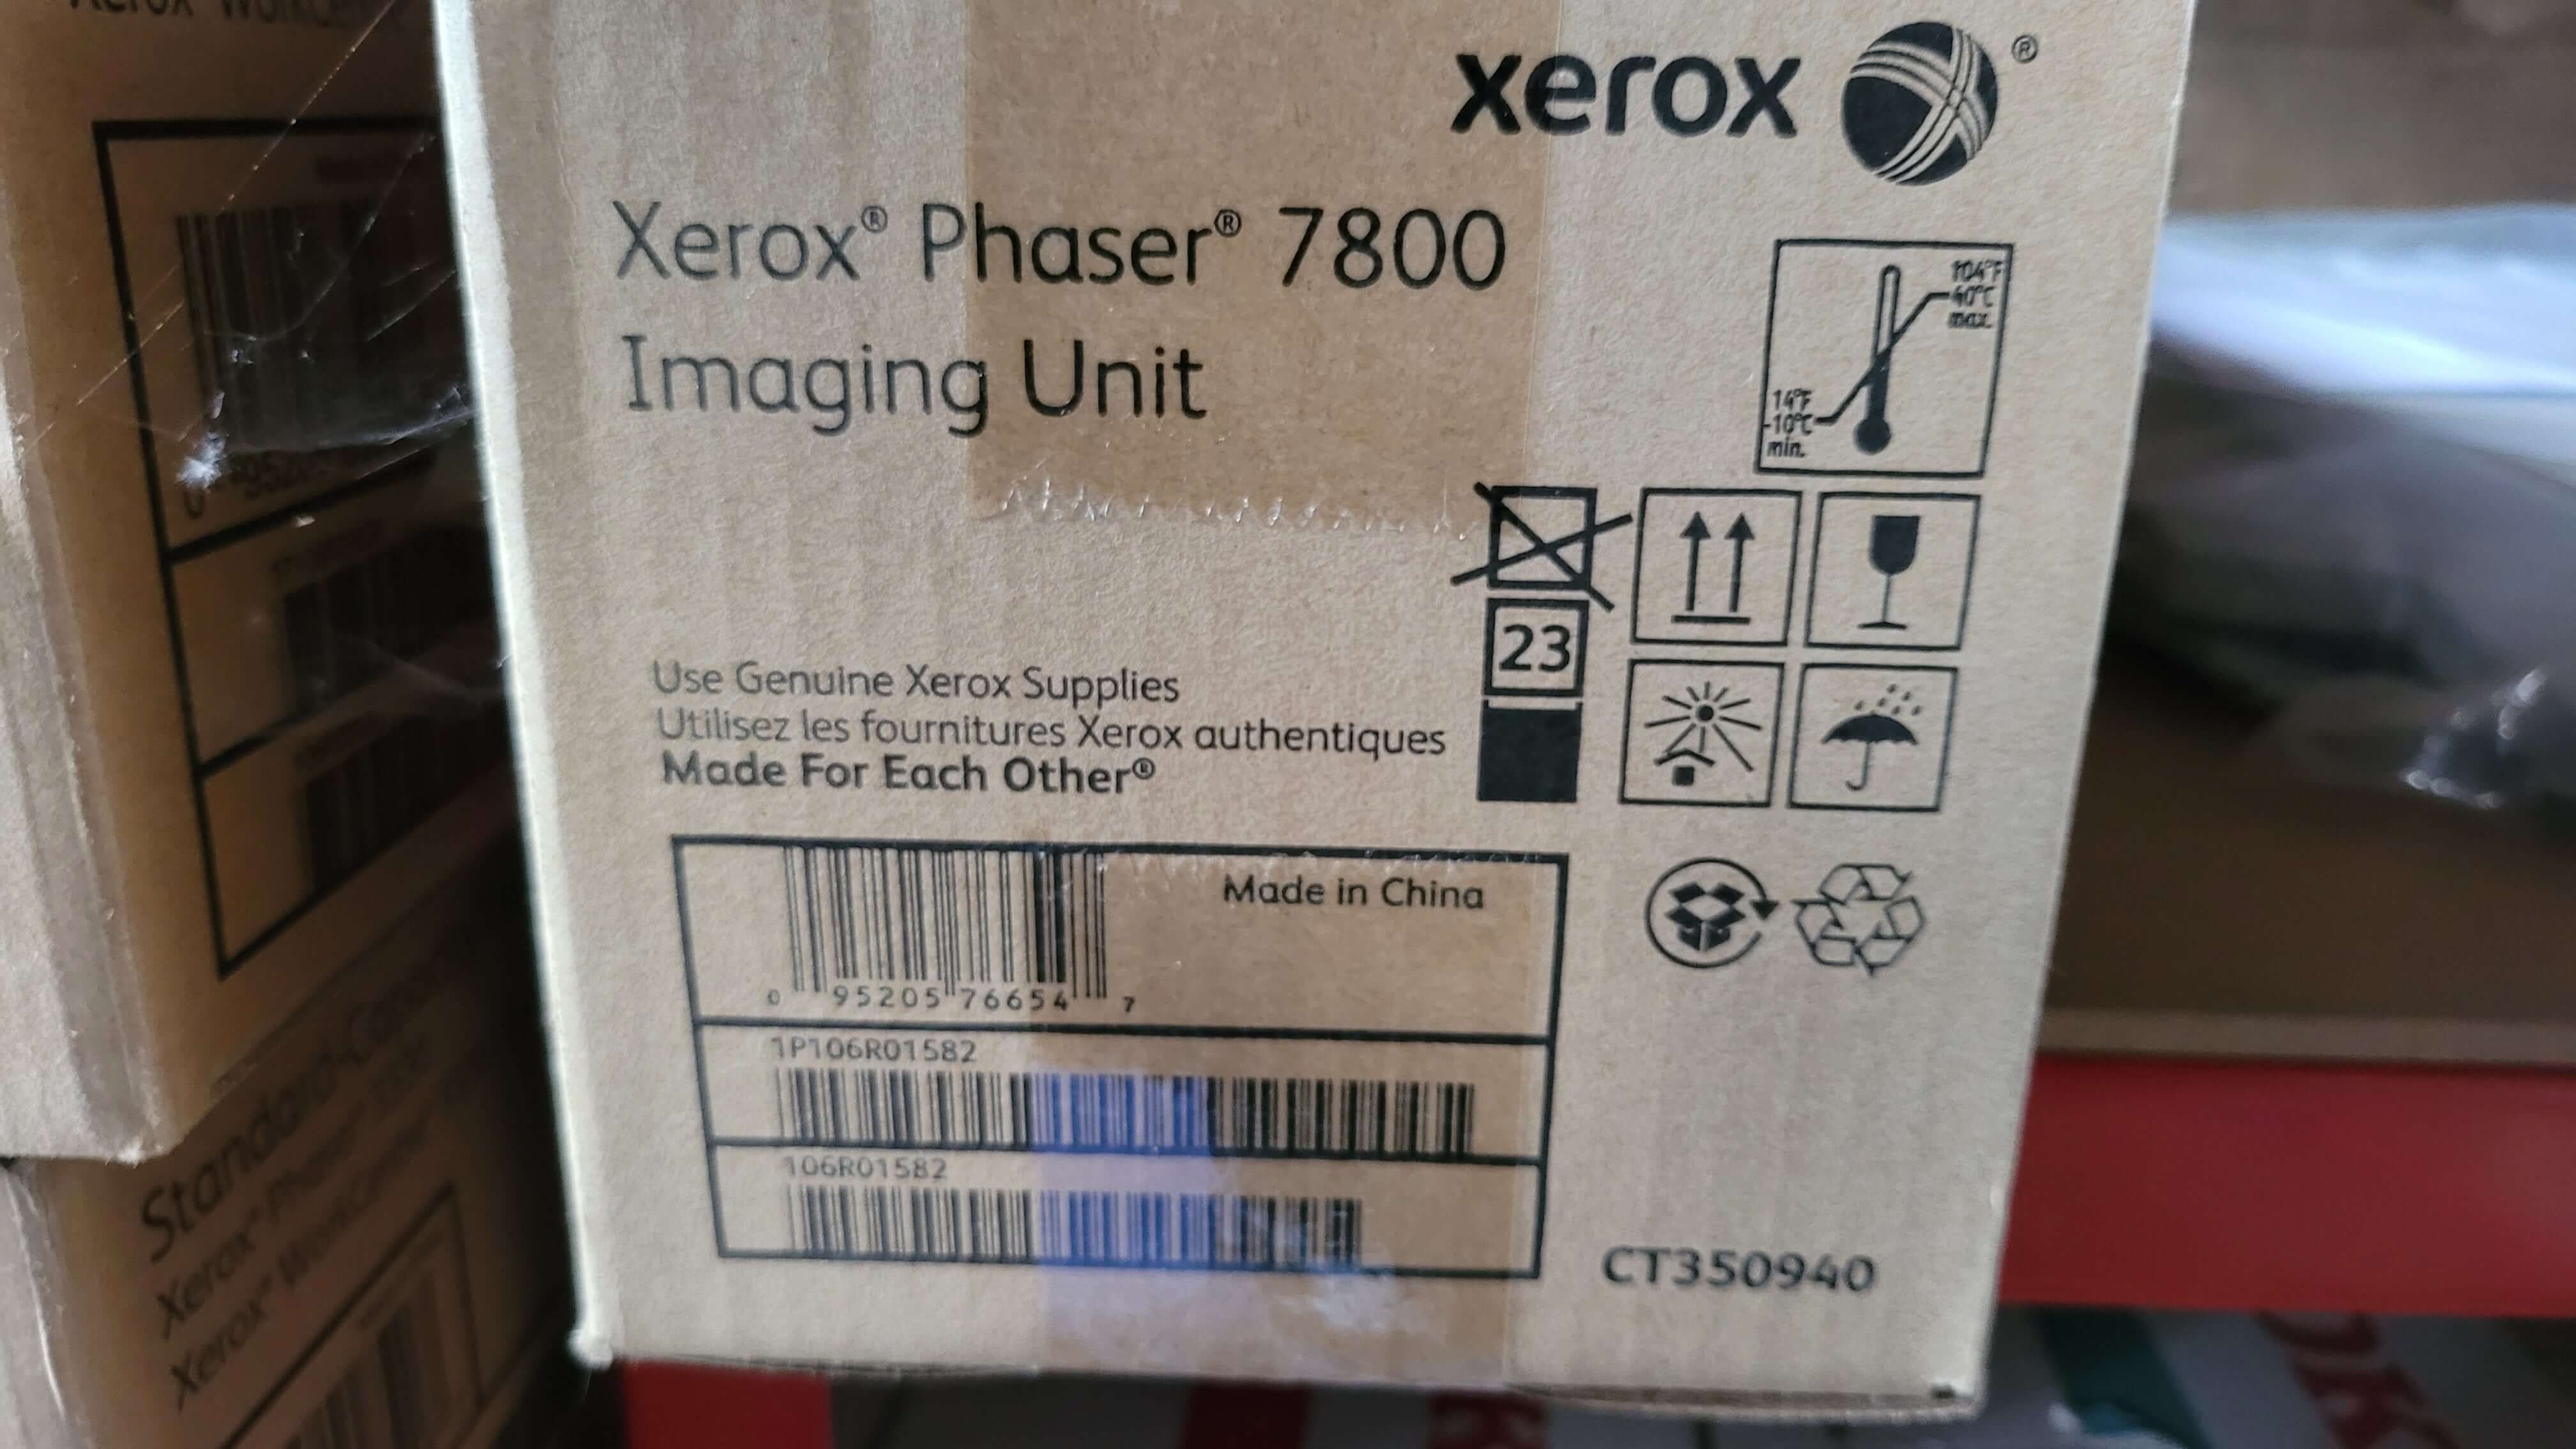 Xerox 106R01582 for Phaser 7800 Imaging unit Drum